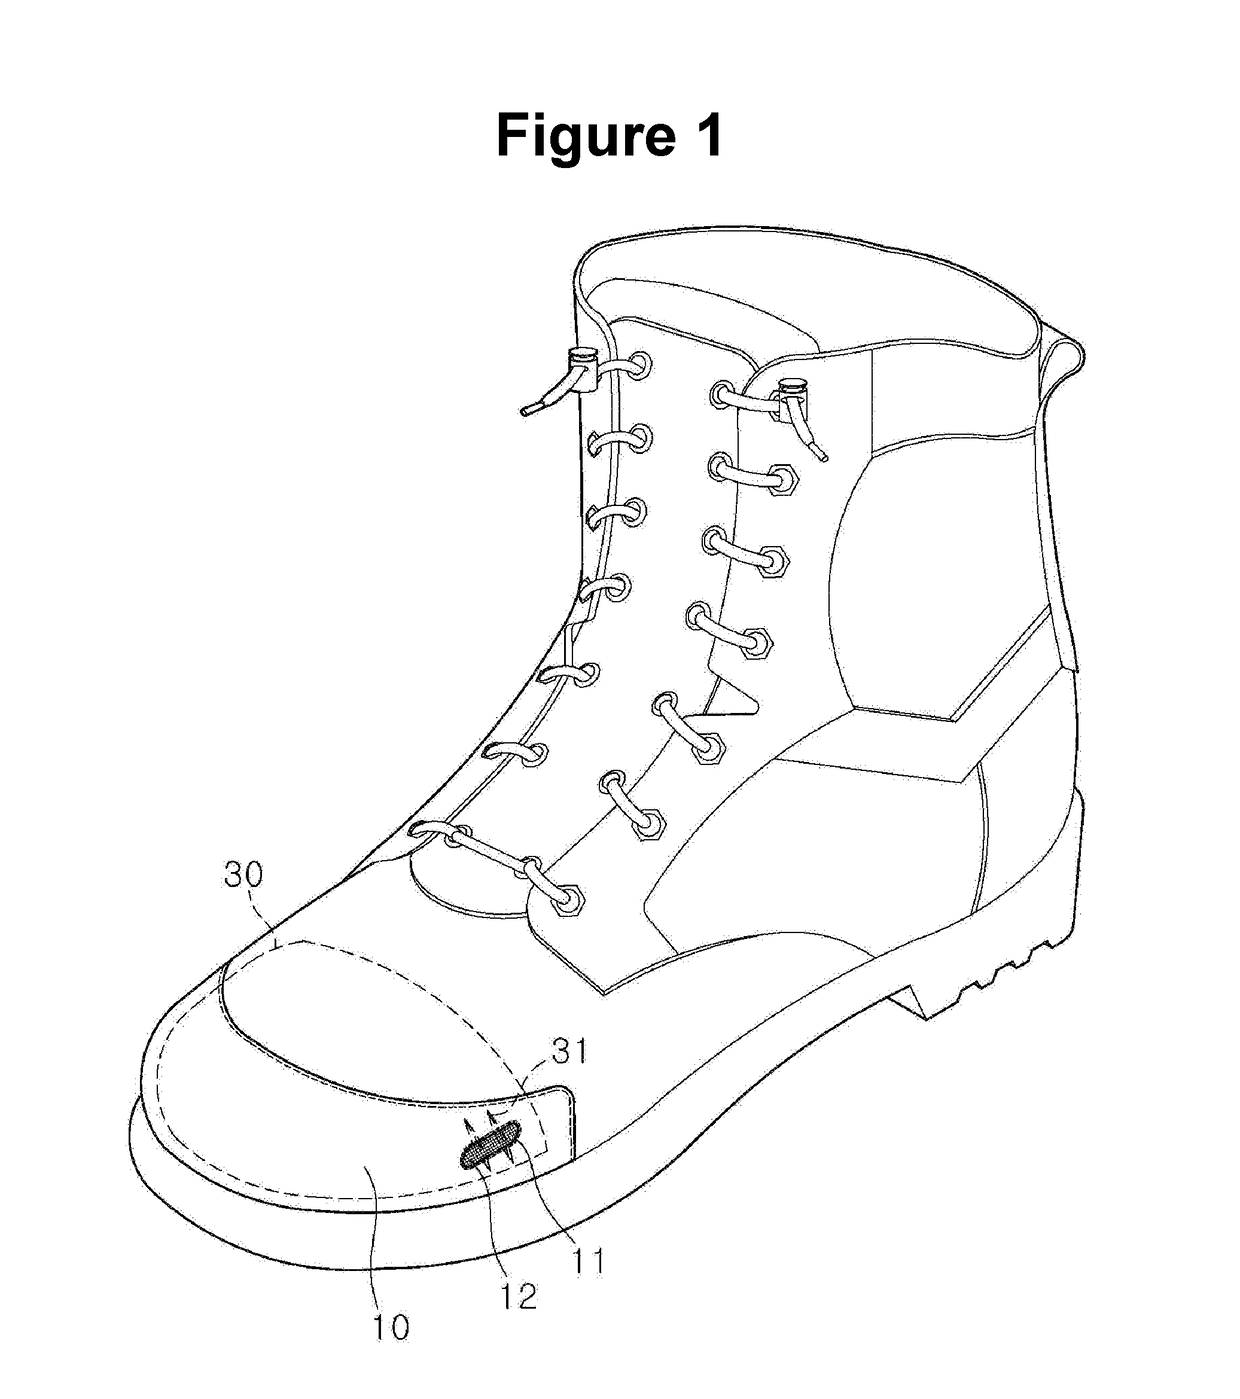 Safety shoes with a ventilation structure